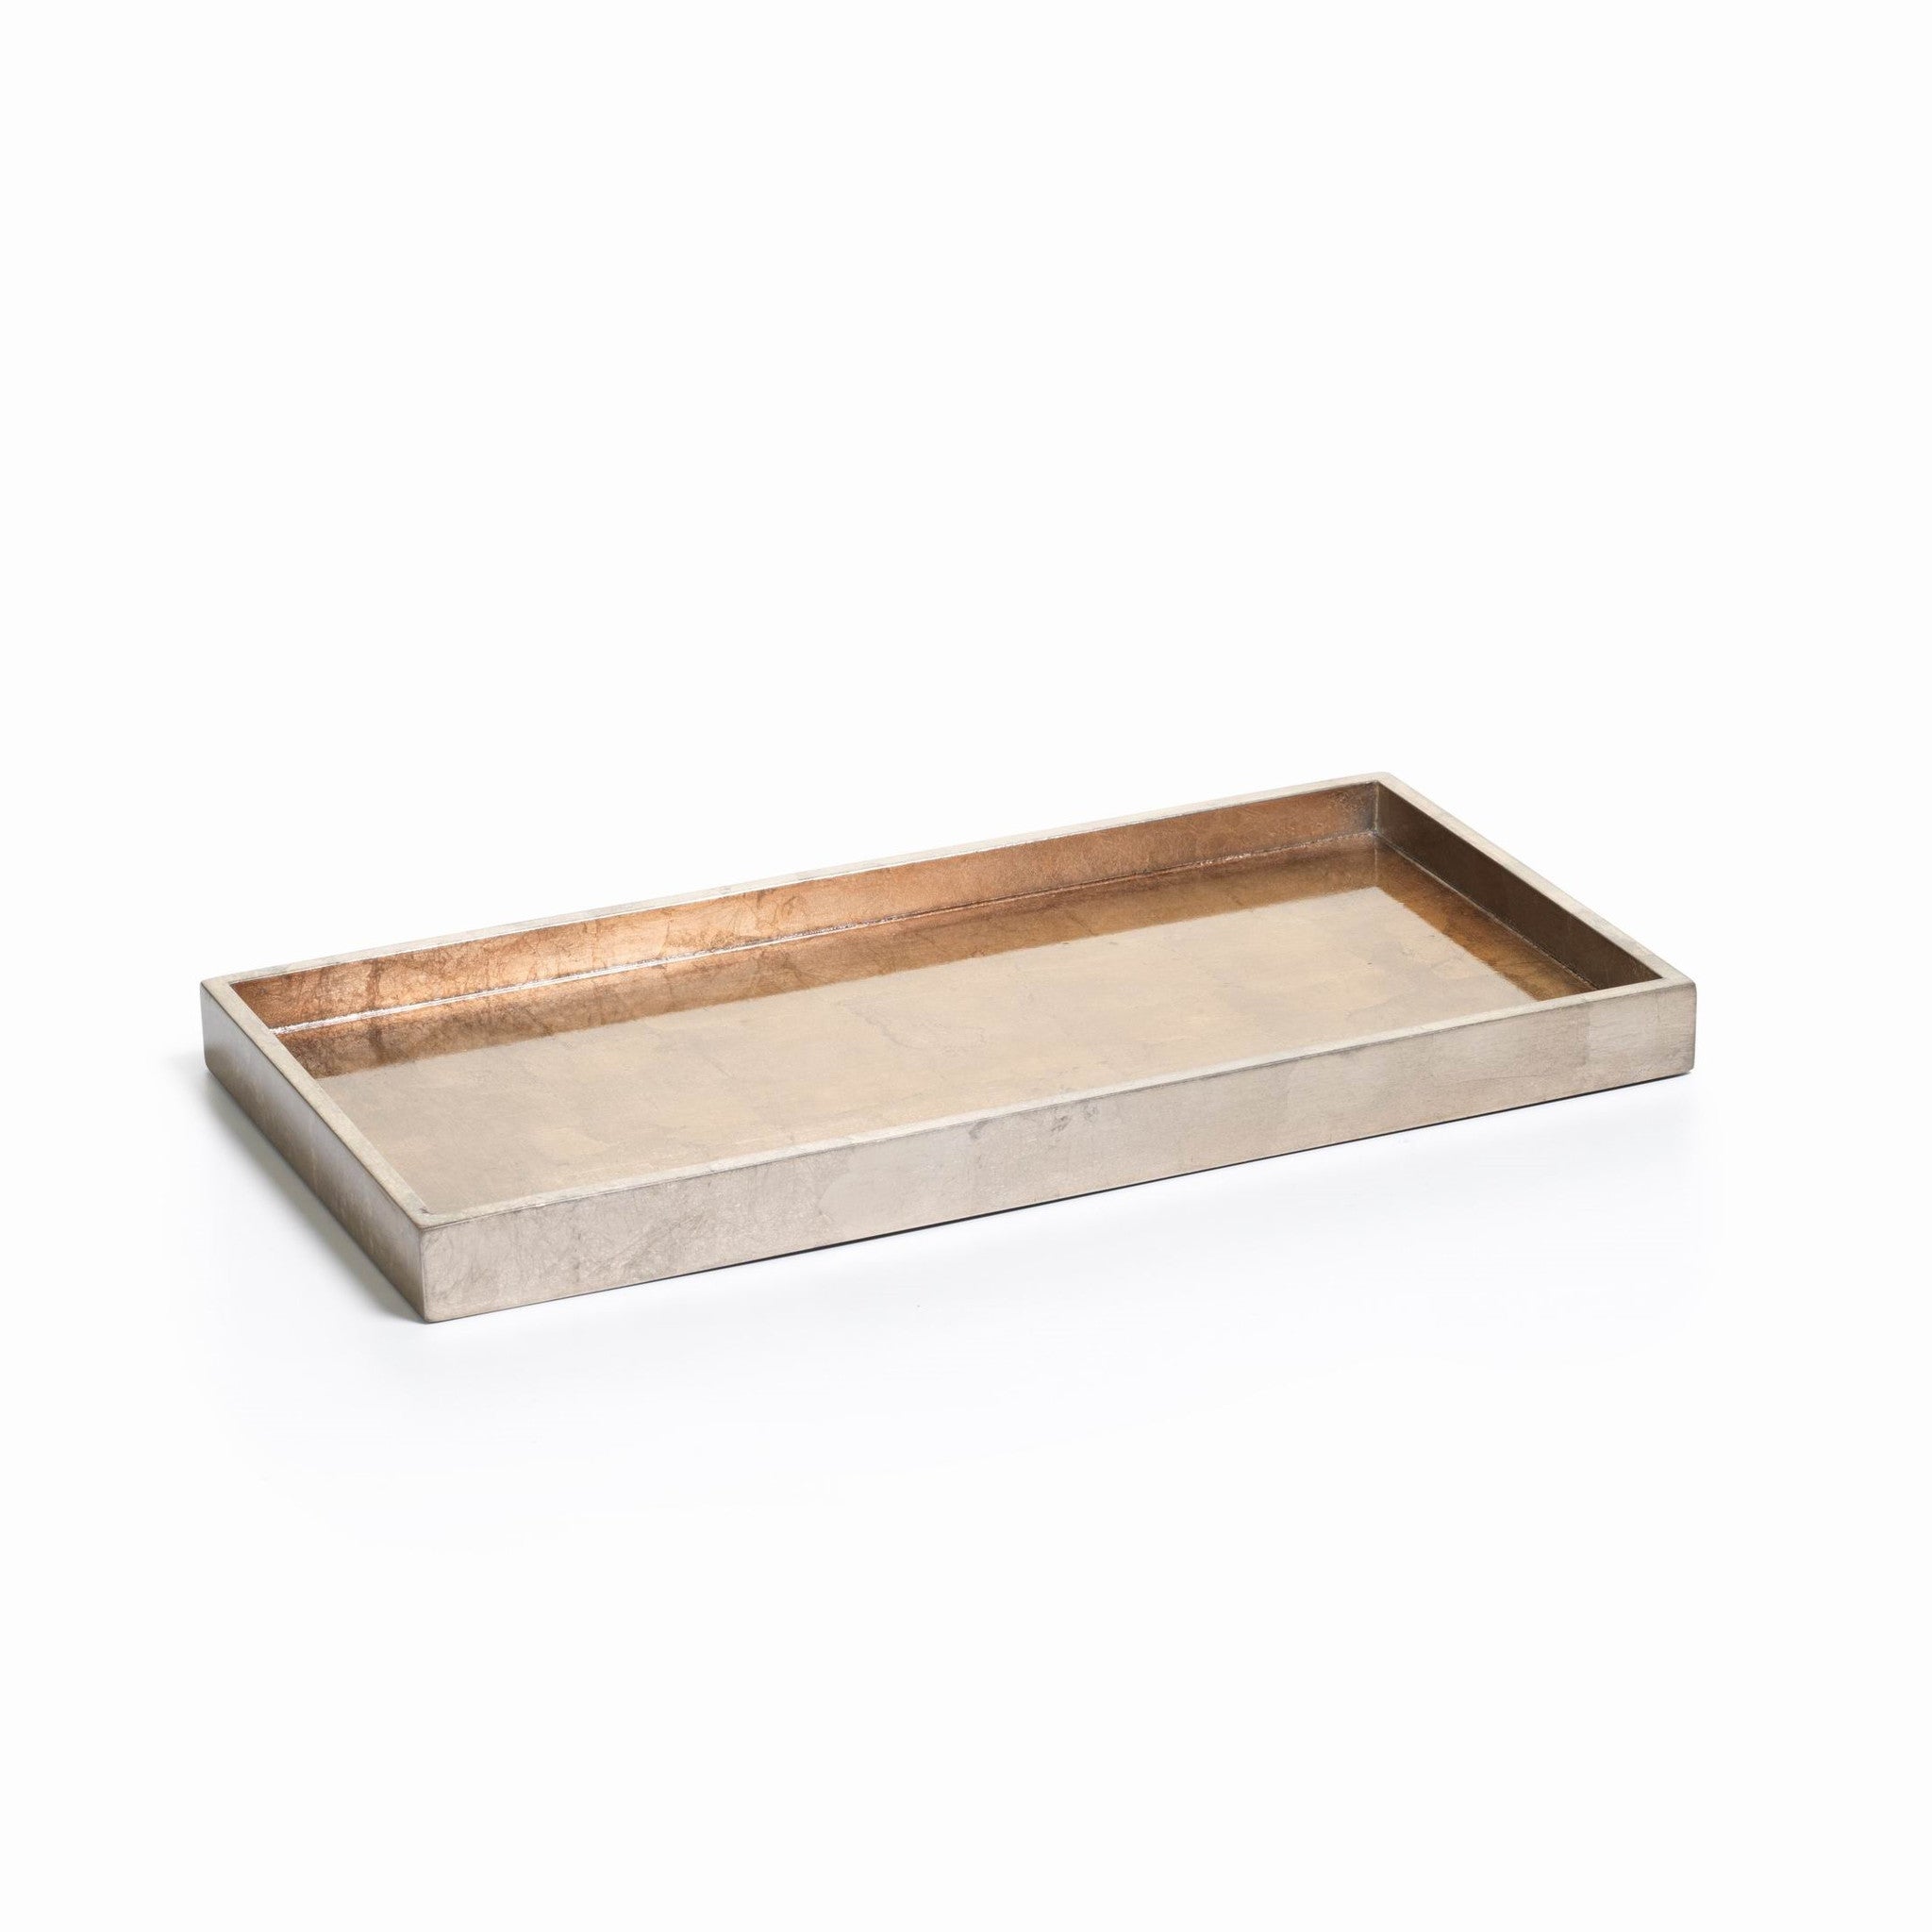 Antique Gold & Silver Serving Tray - CARLYLE AVENUE